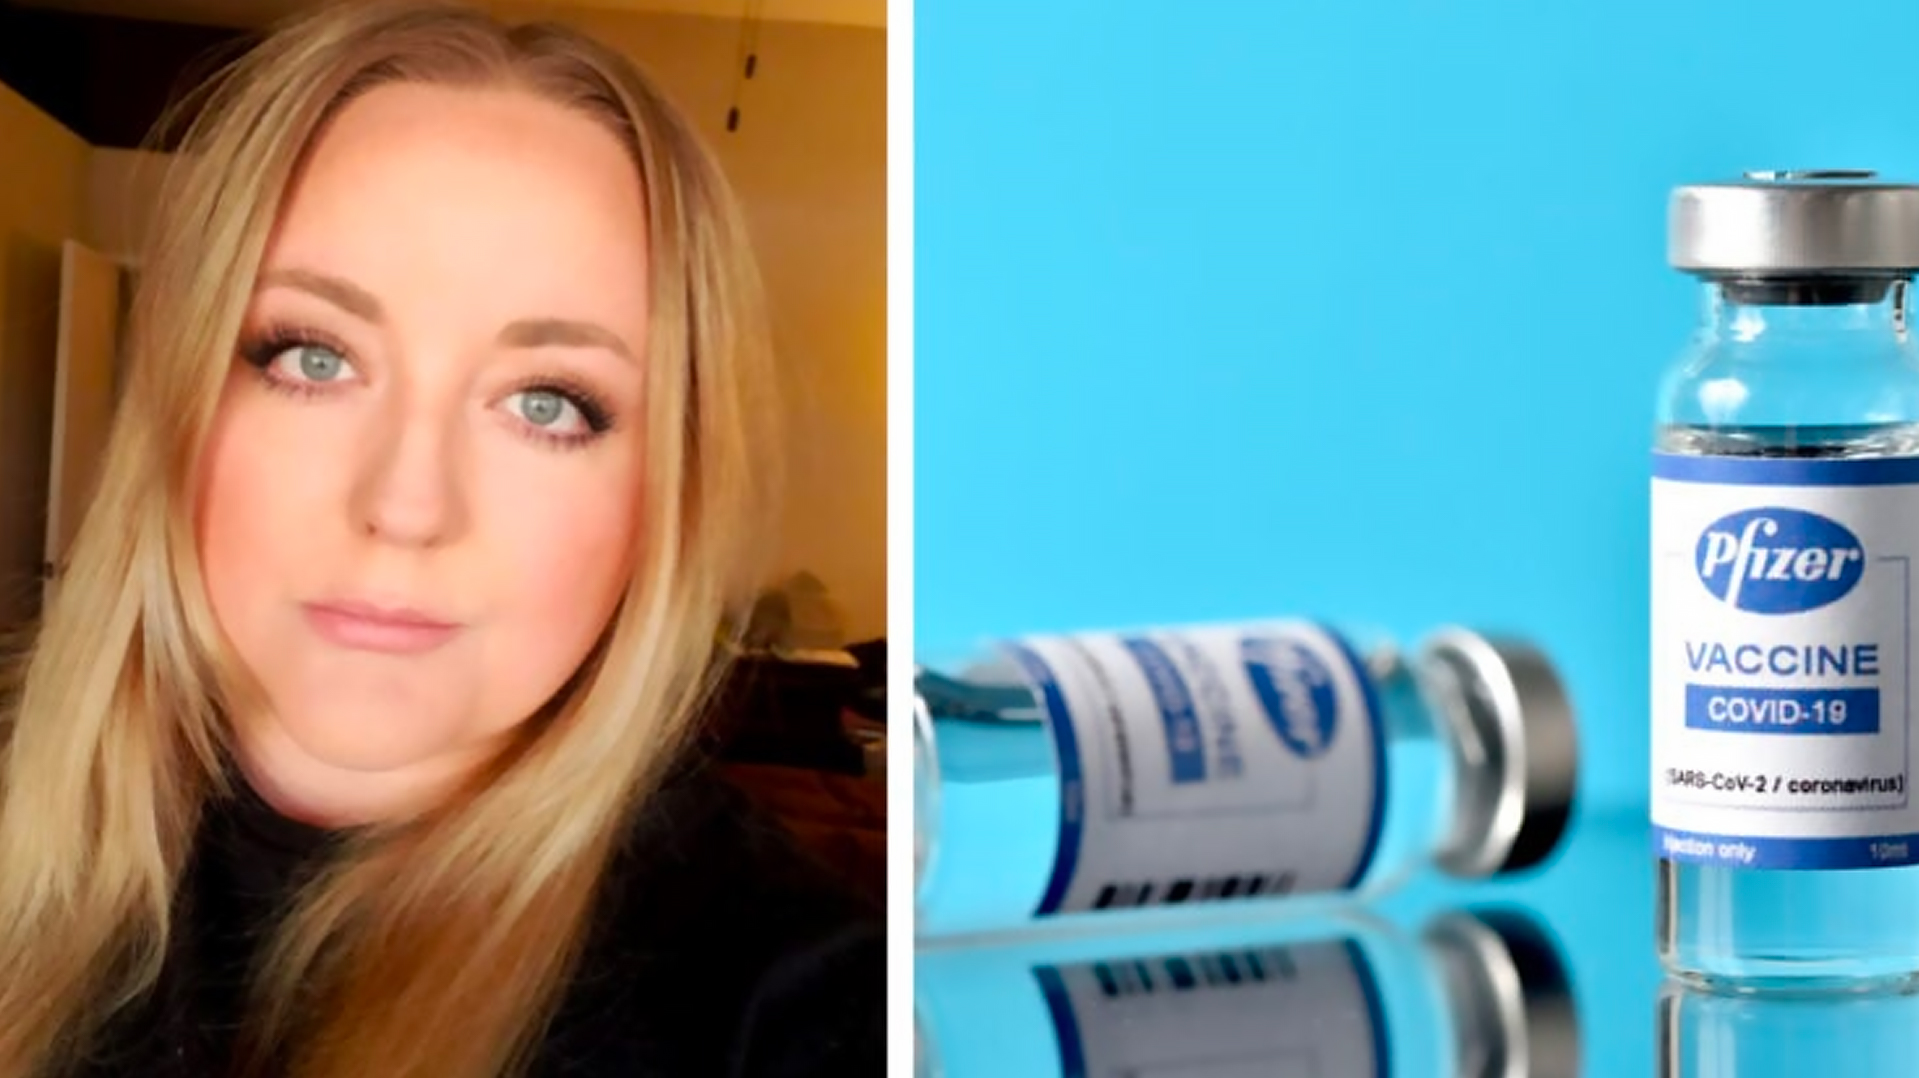 Exclusive: 29-Year-Old’s Career Came ‘Crashing’ Down After Pfizer COVID Vaccine Injury